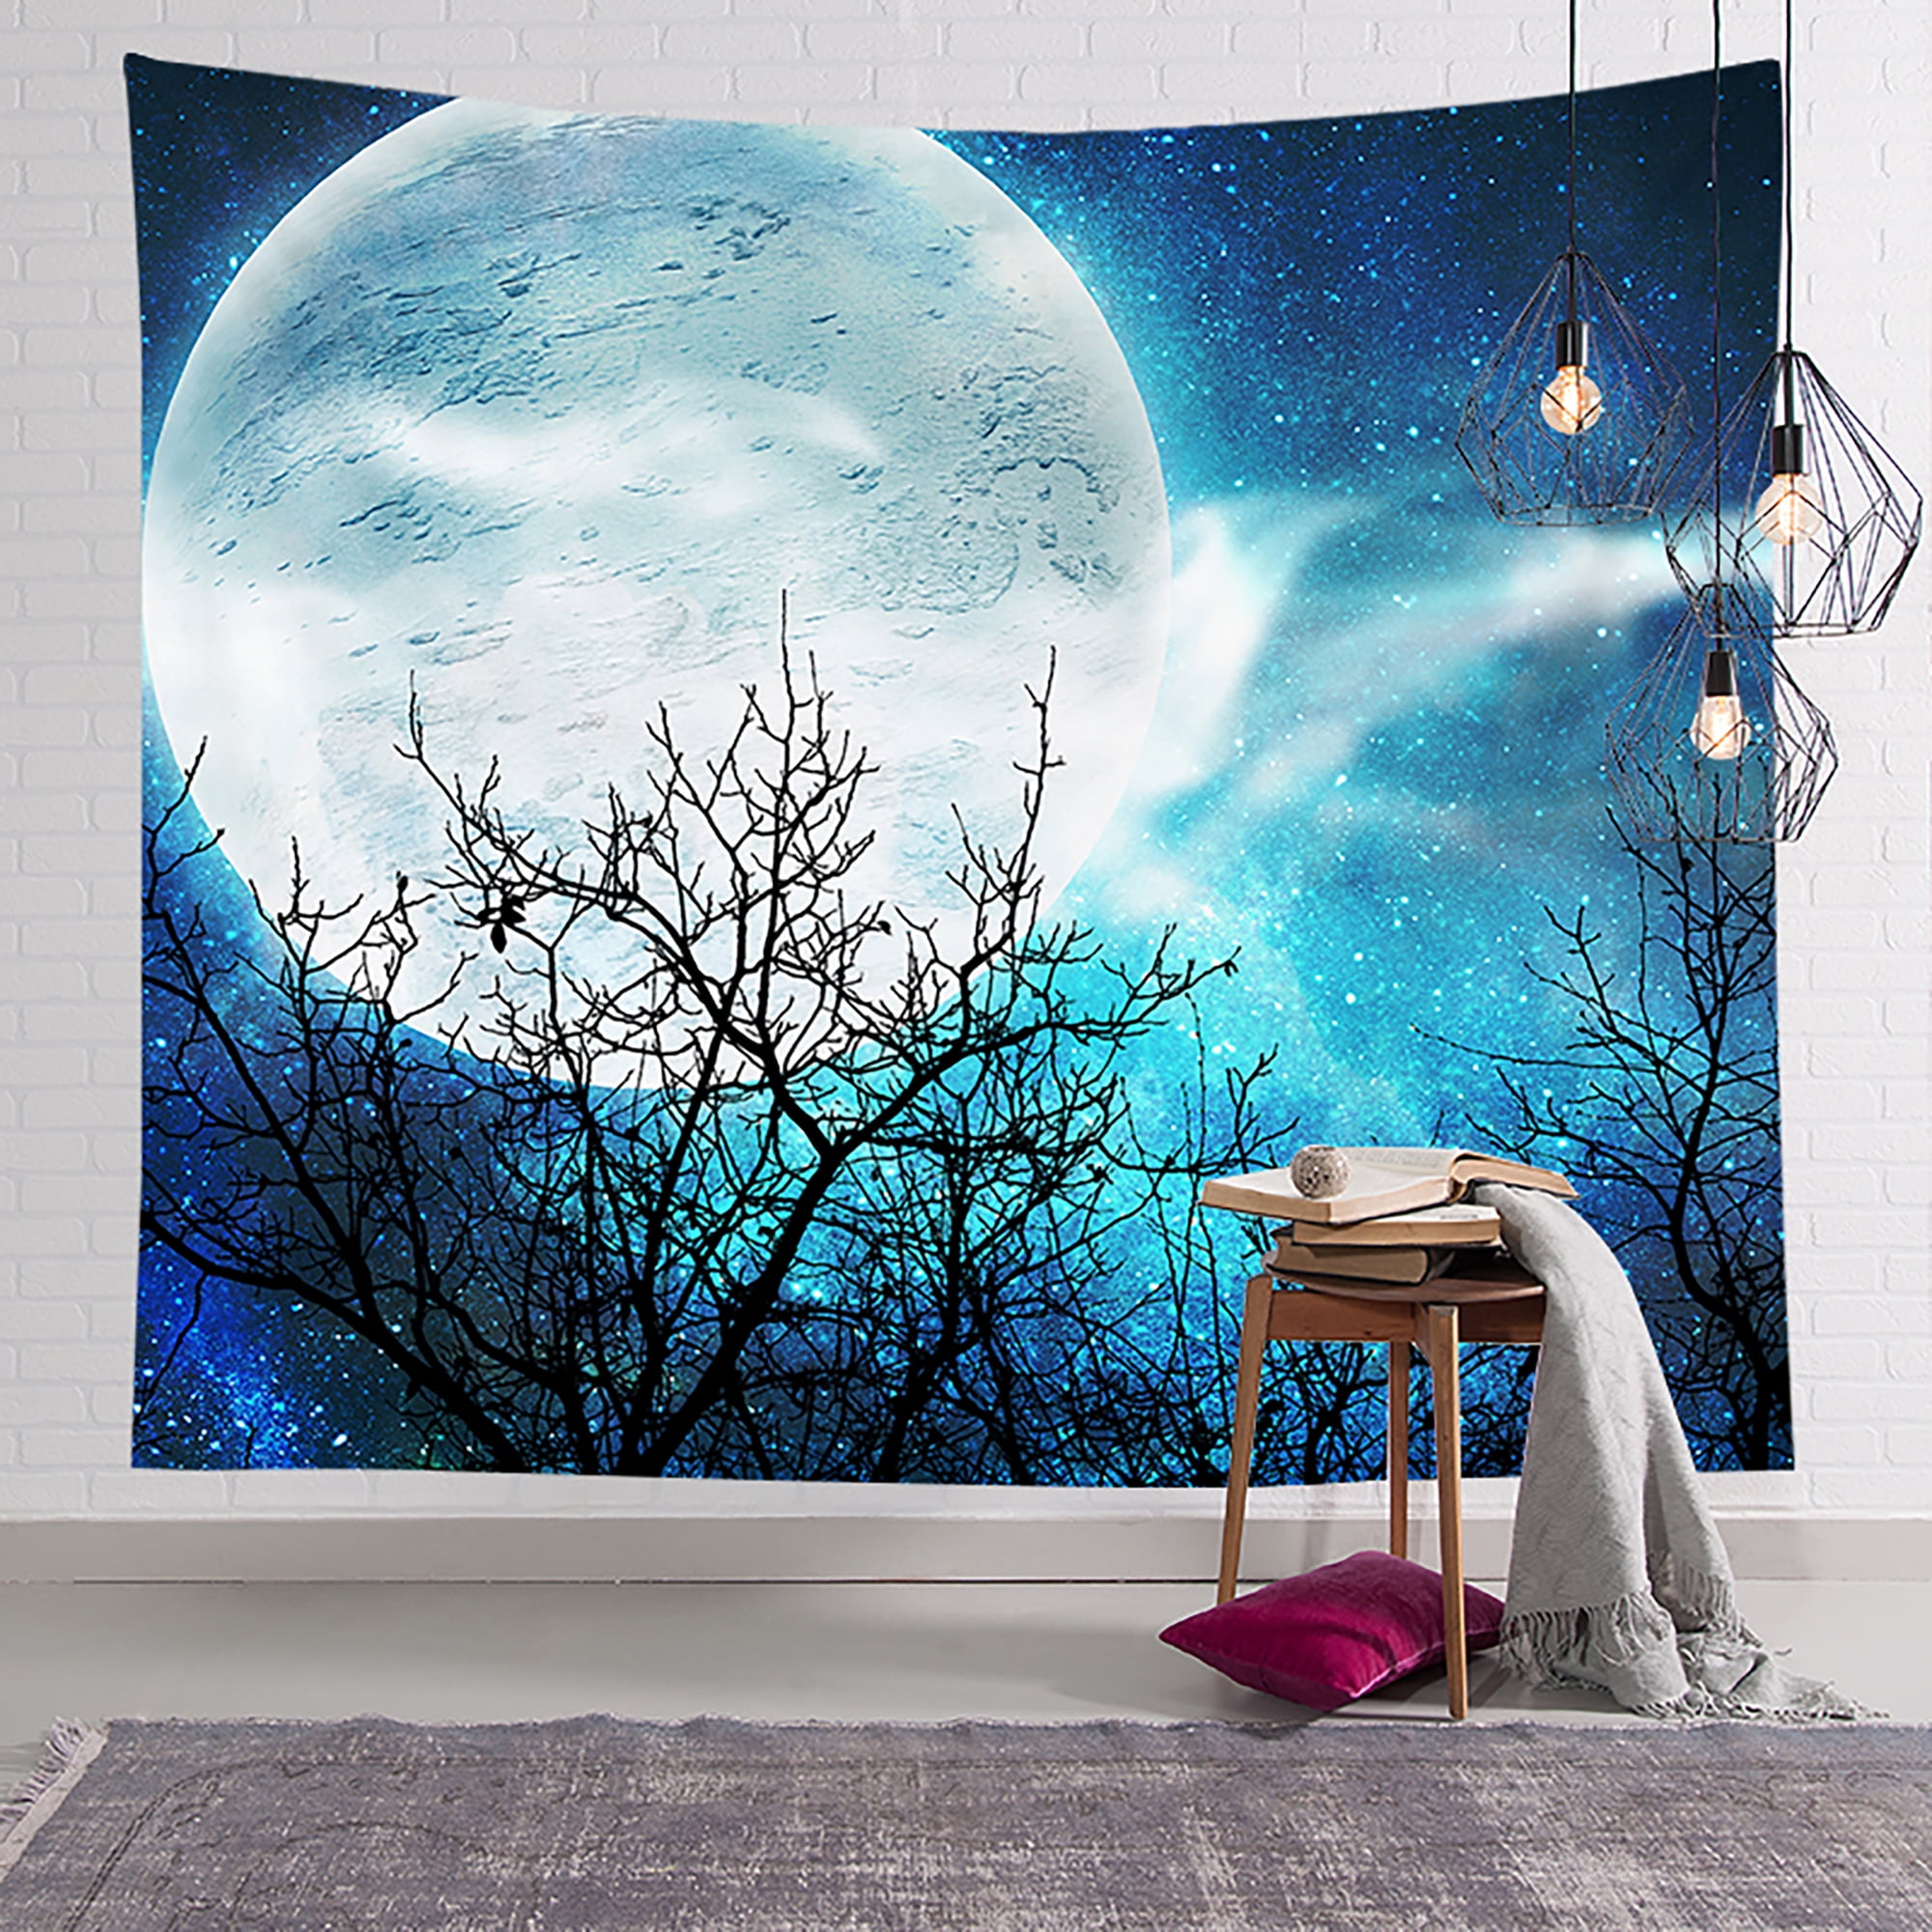 CUH Large Wall Hanging Landscape Fantasy Throw Tapestry Bedspread Blanket Home Decor Outdoor